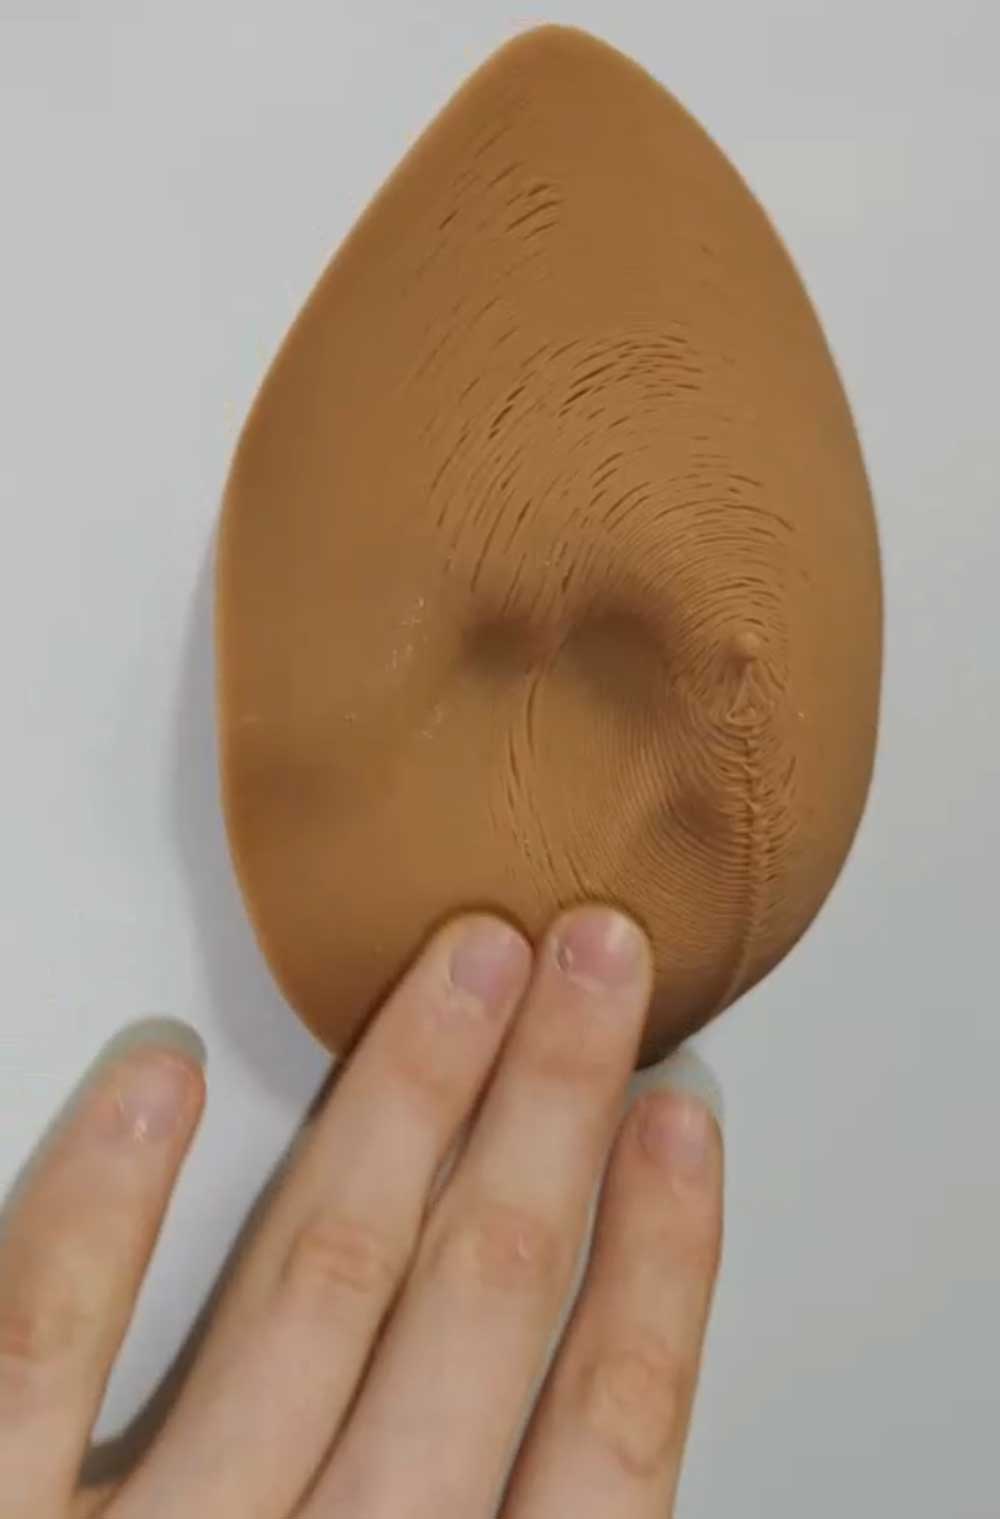 3D printed silicone breast implant